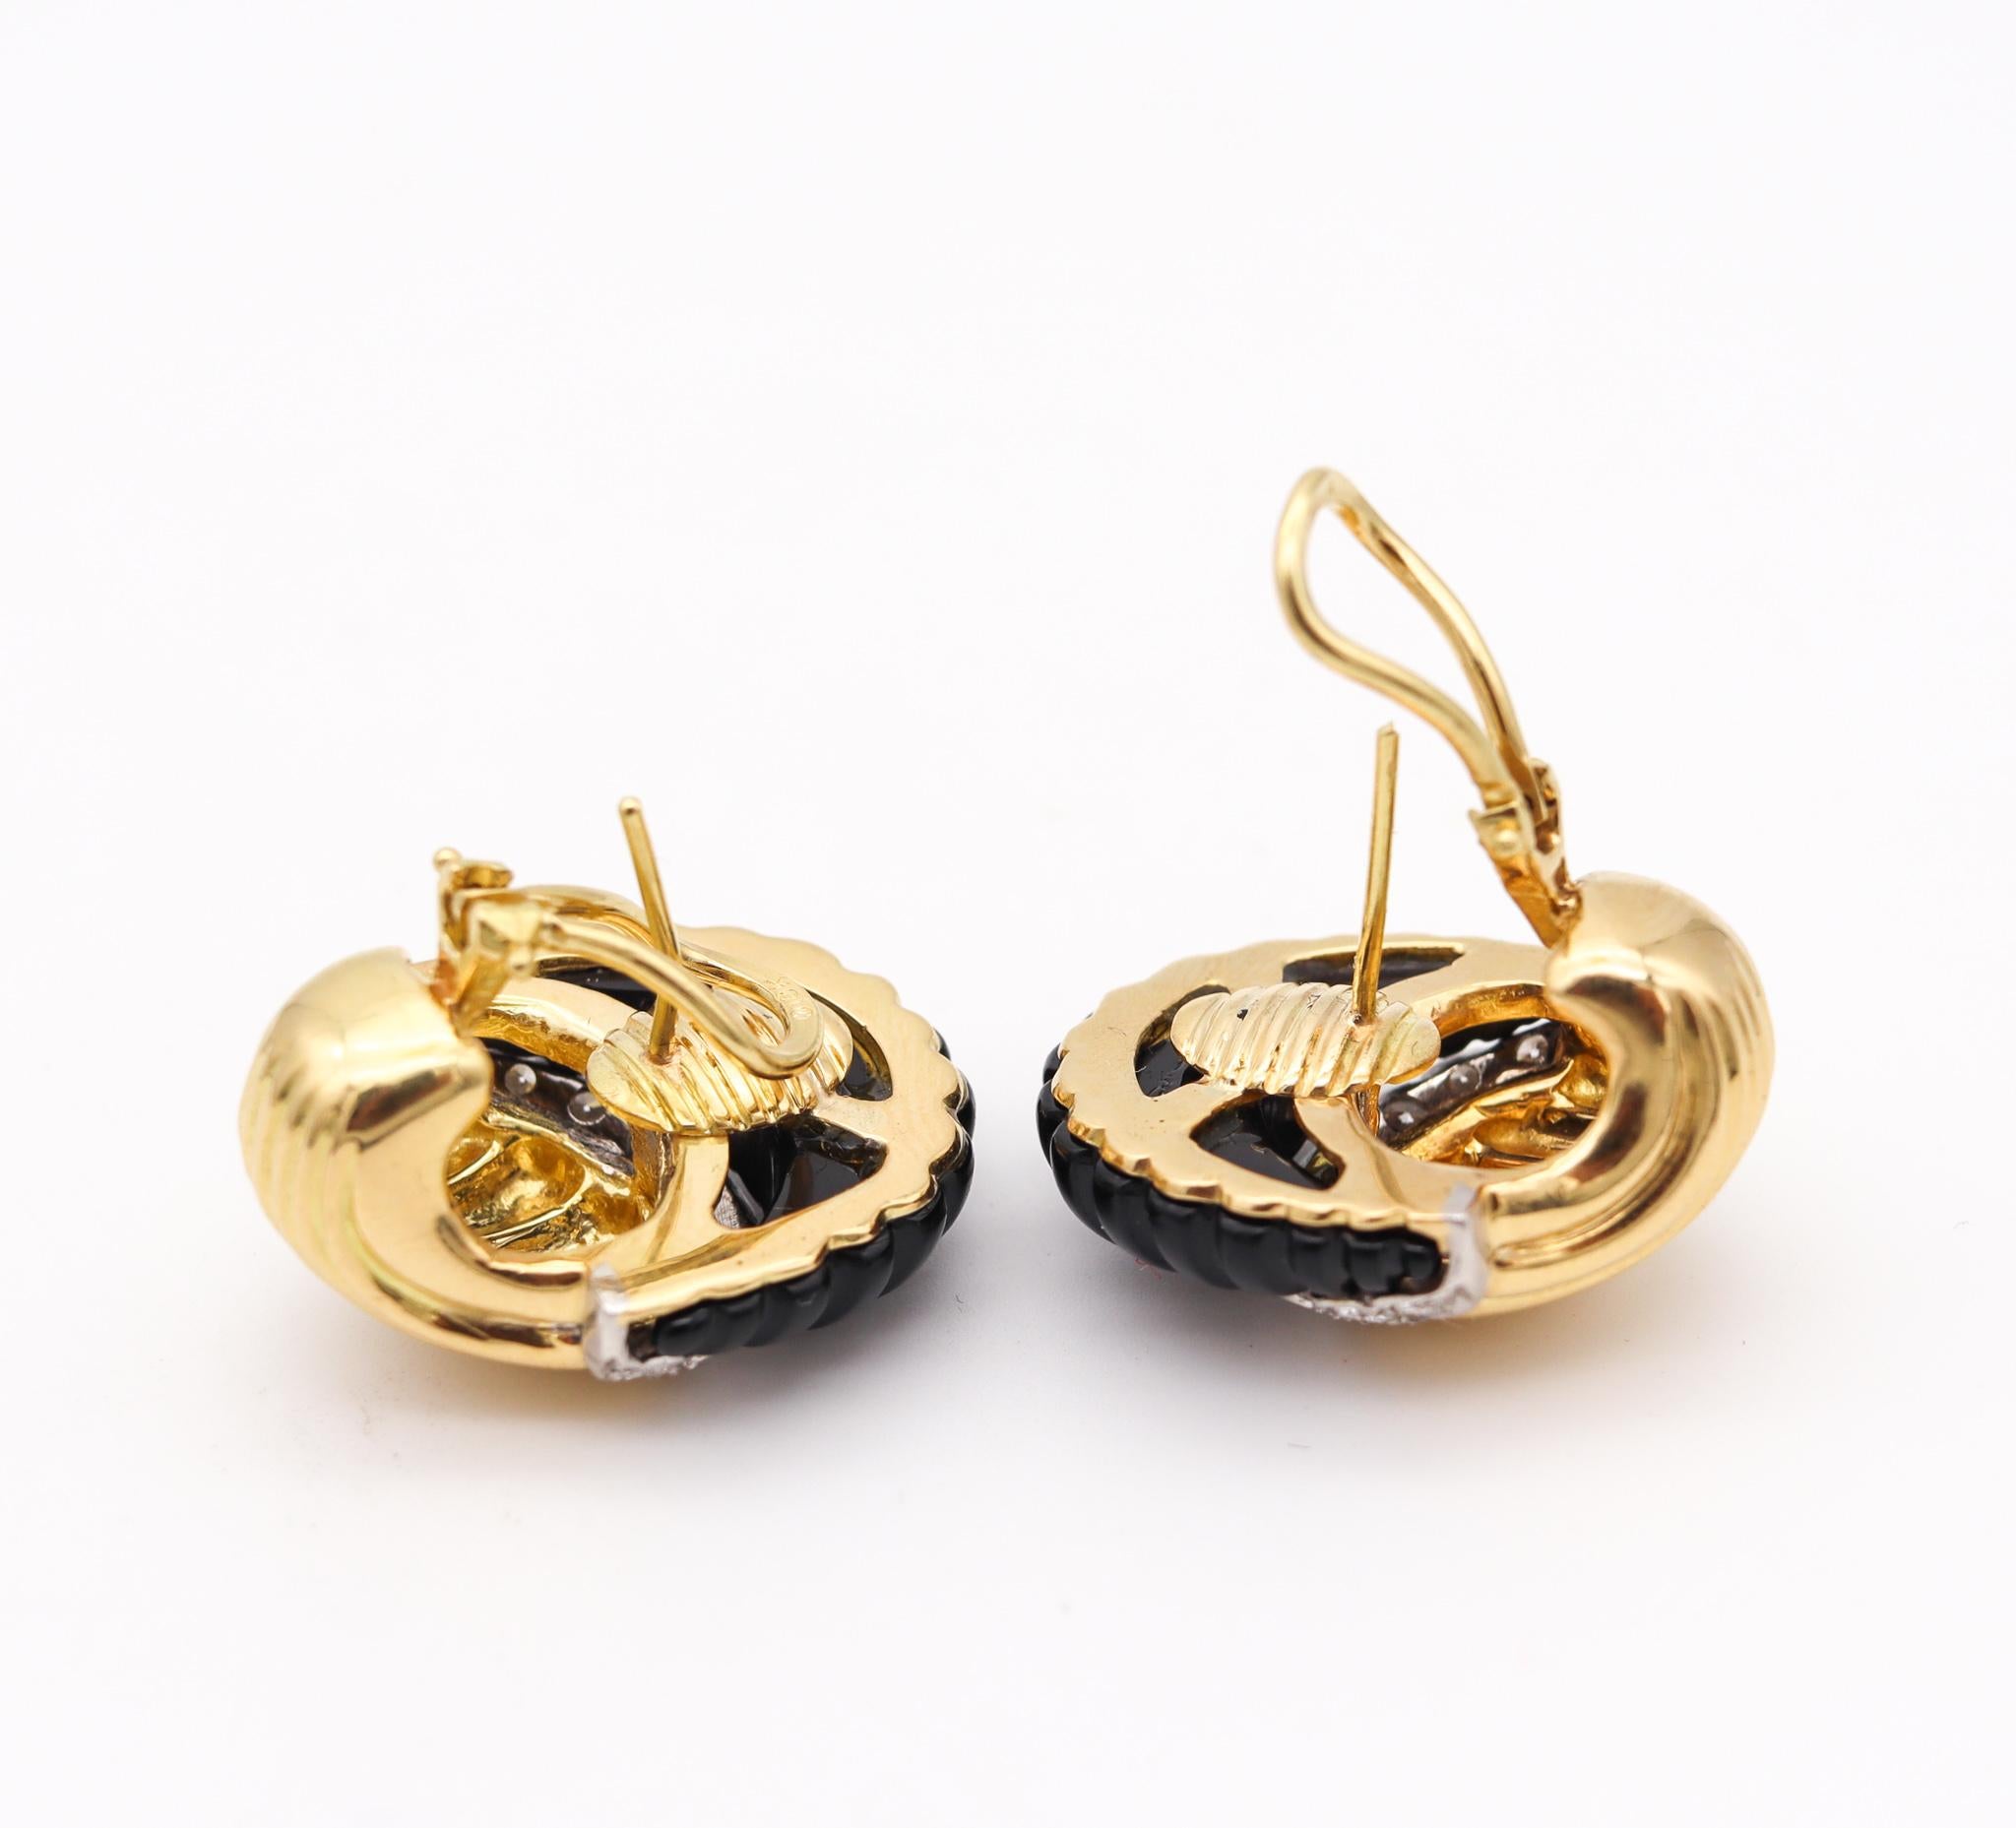 Brilliant Cut Modernist Fluted Earrings in 18kt Yellow Gold with 20.28 Cts in Diamonds & Onyx